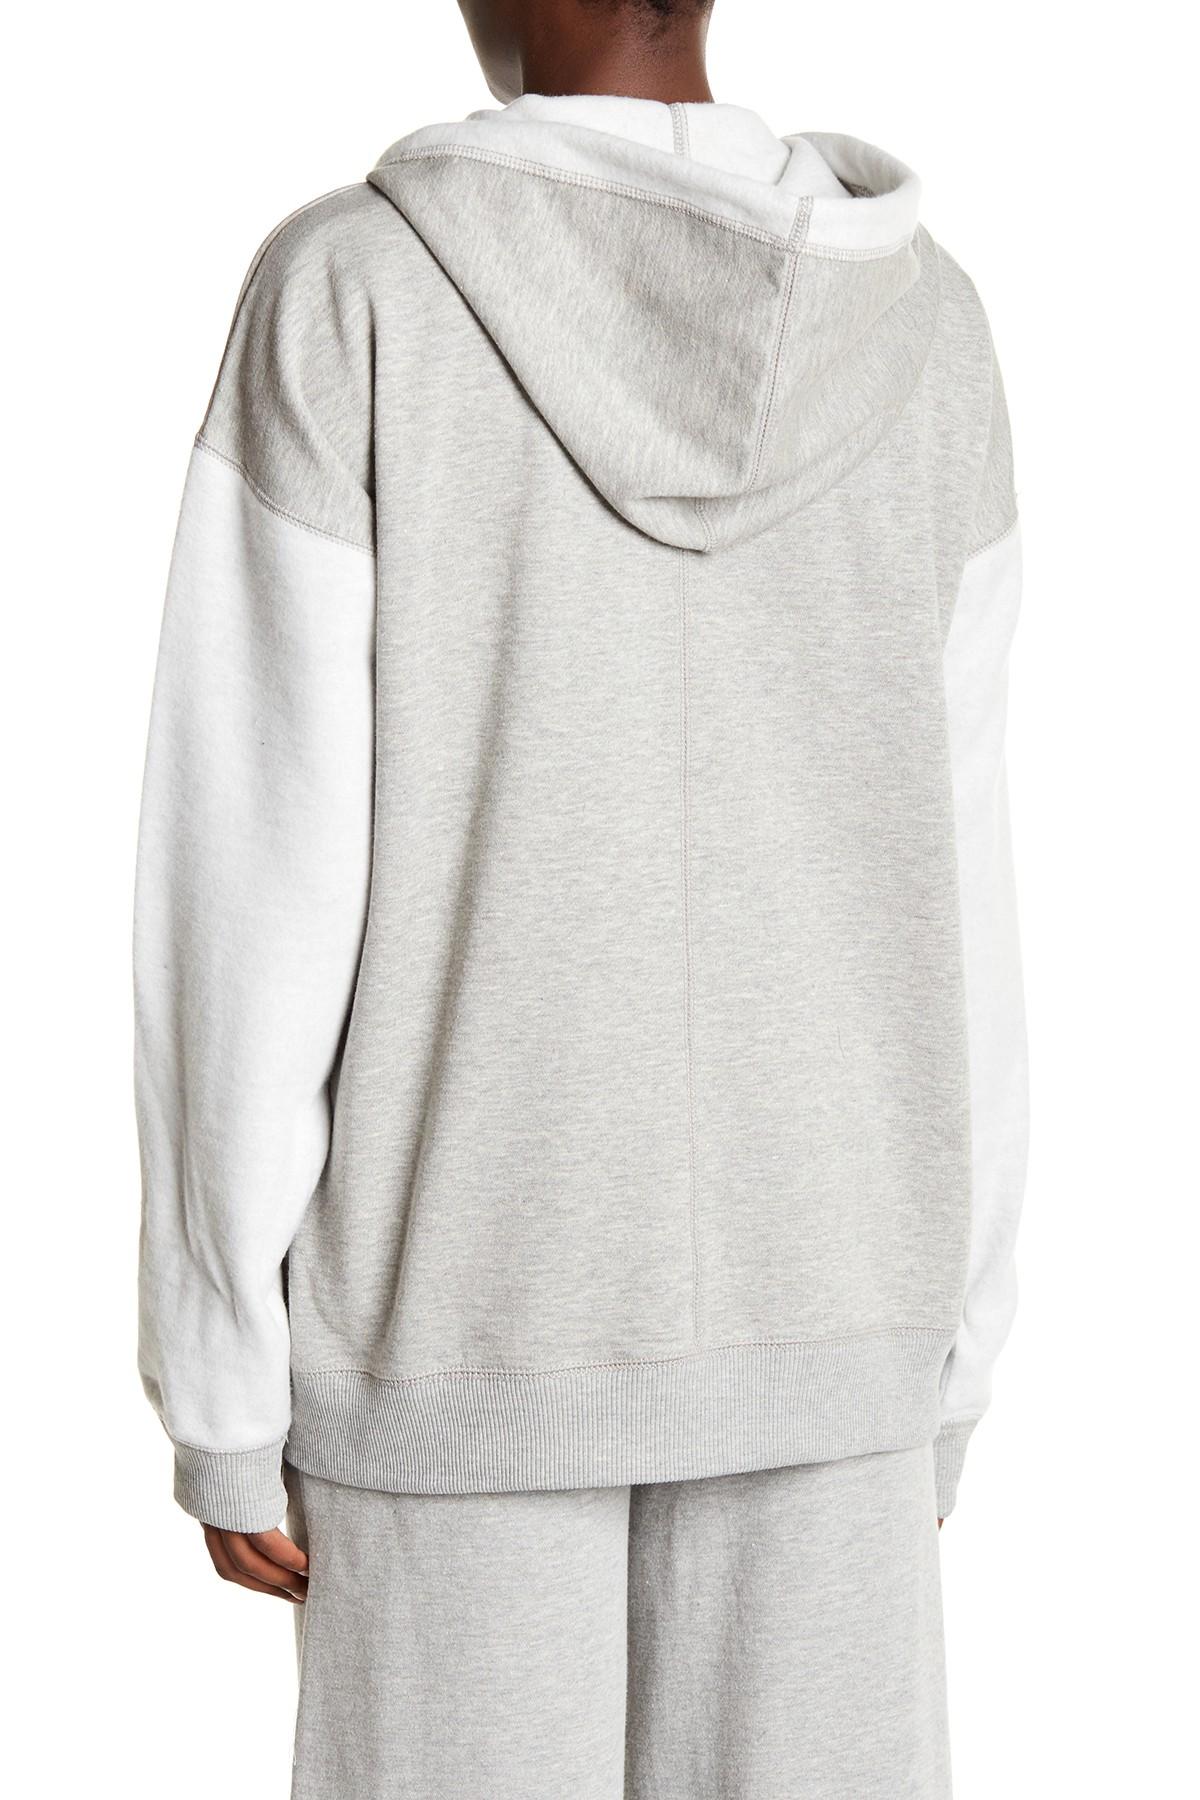 Download Free People Synthetic Drawstring Front Zip Hoodie in Grey ...